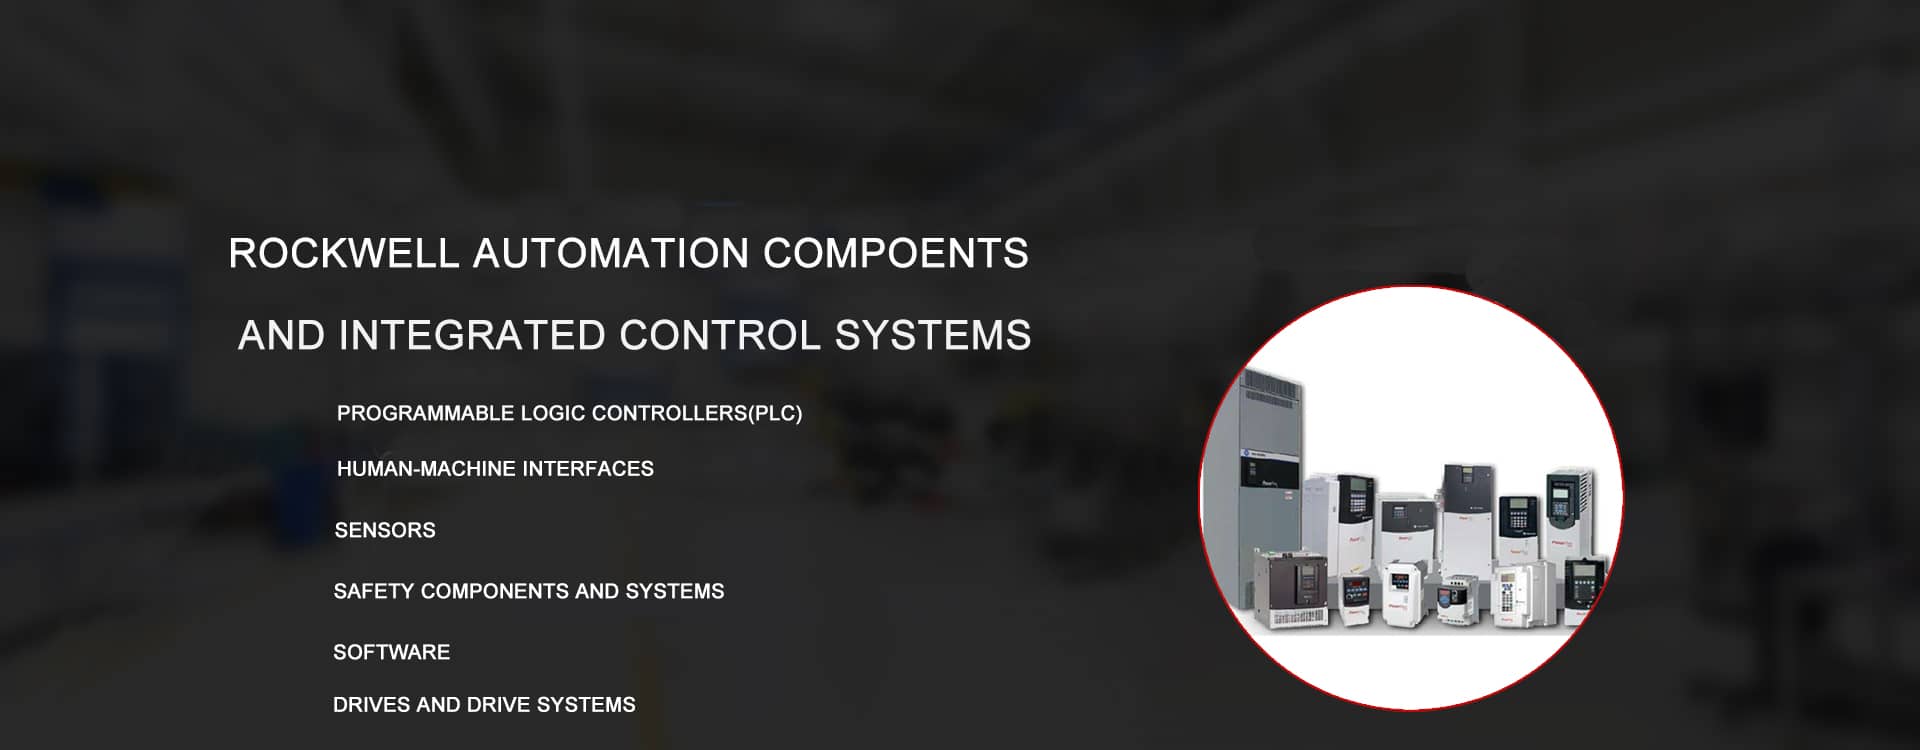 Rockwell Automation components and integrated control systems